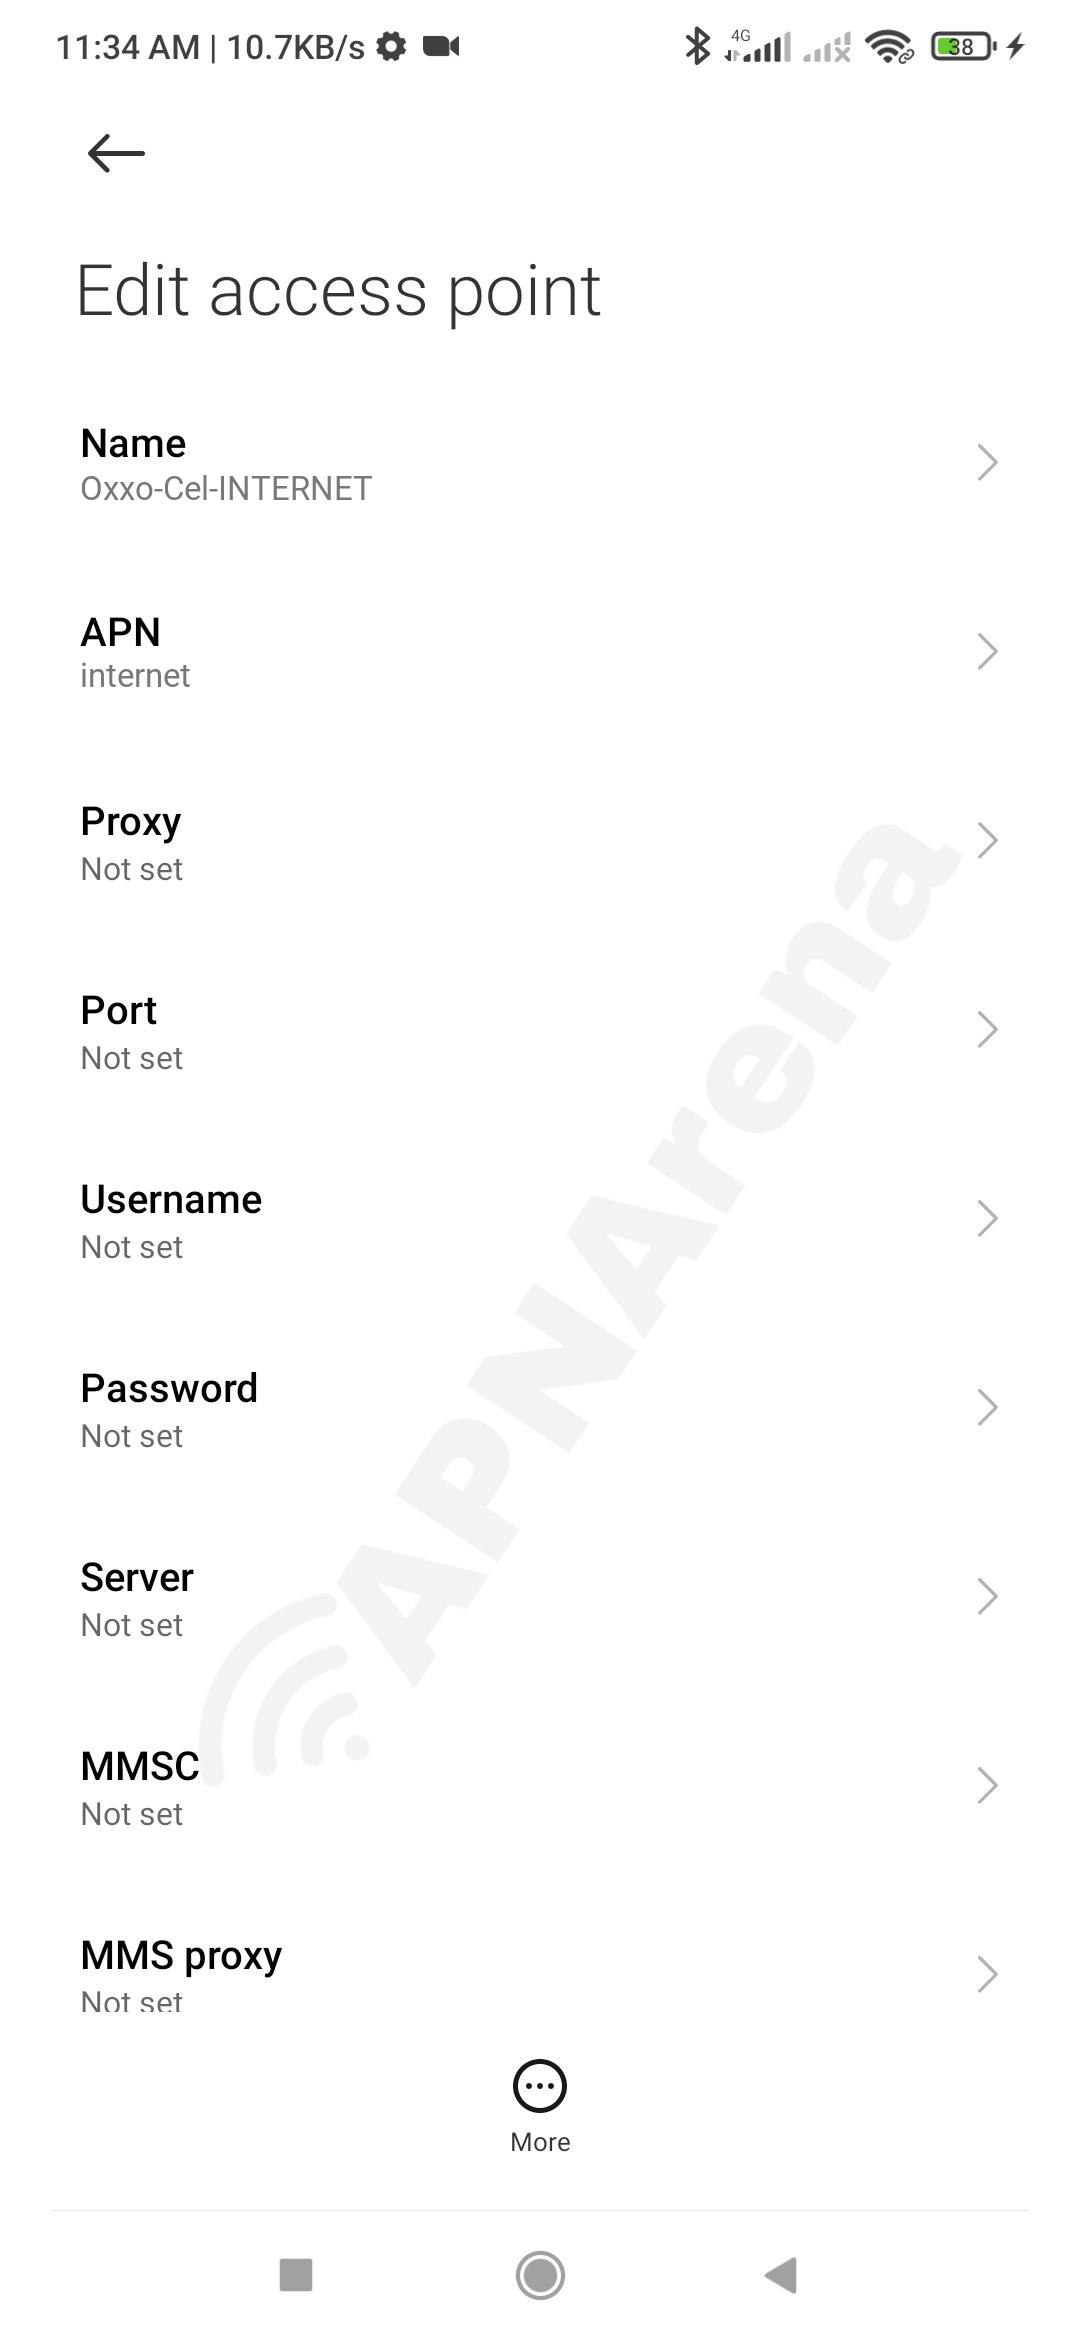 OXXO Cel APN Settings for Android